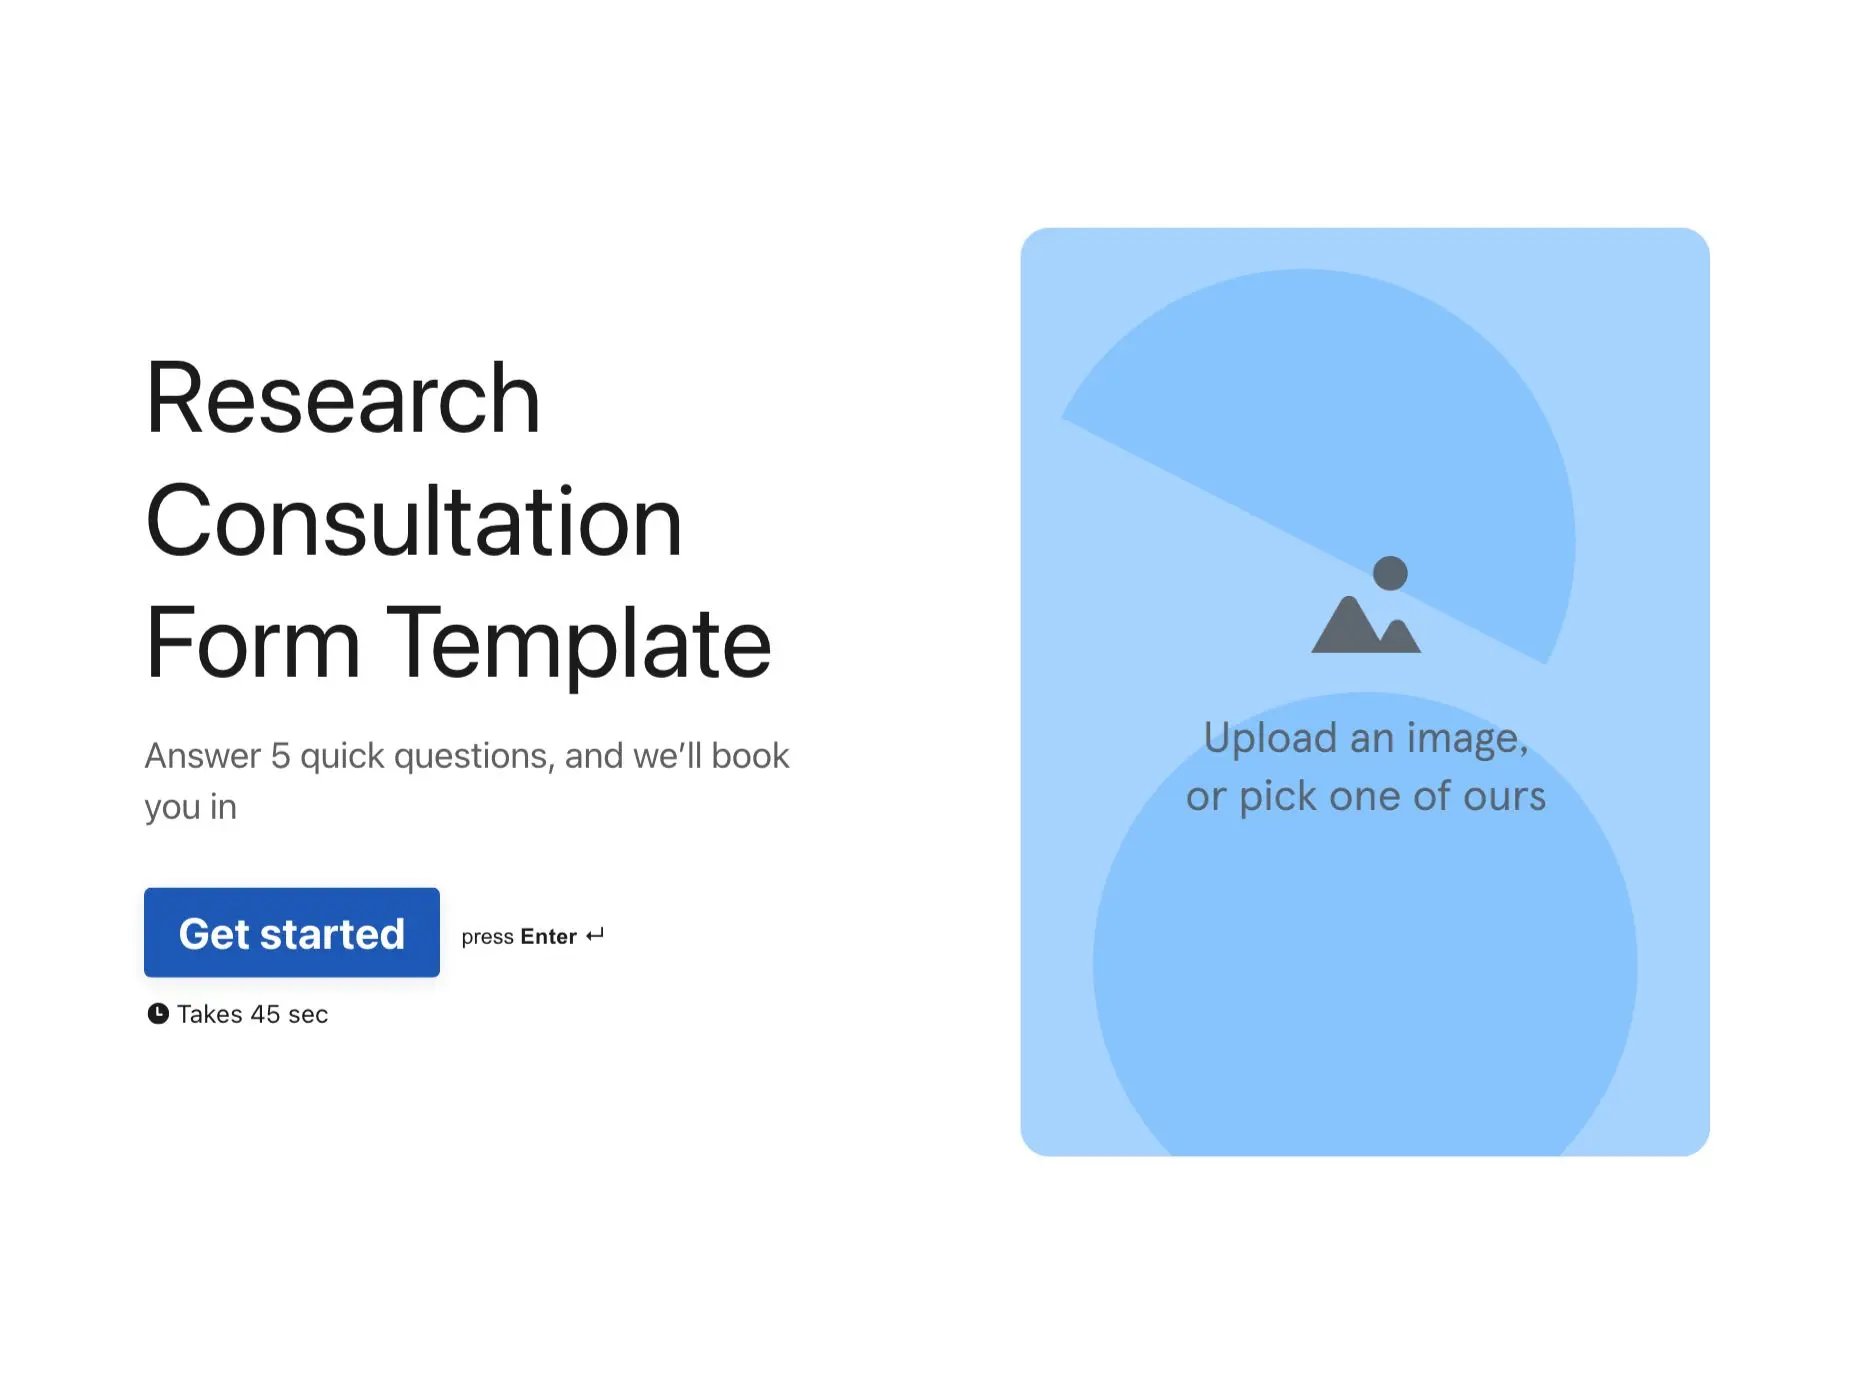 Research Consultation Form Template Hero